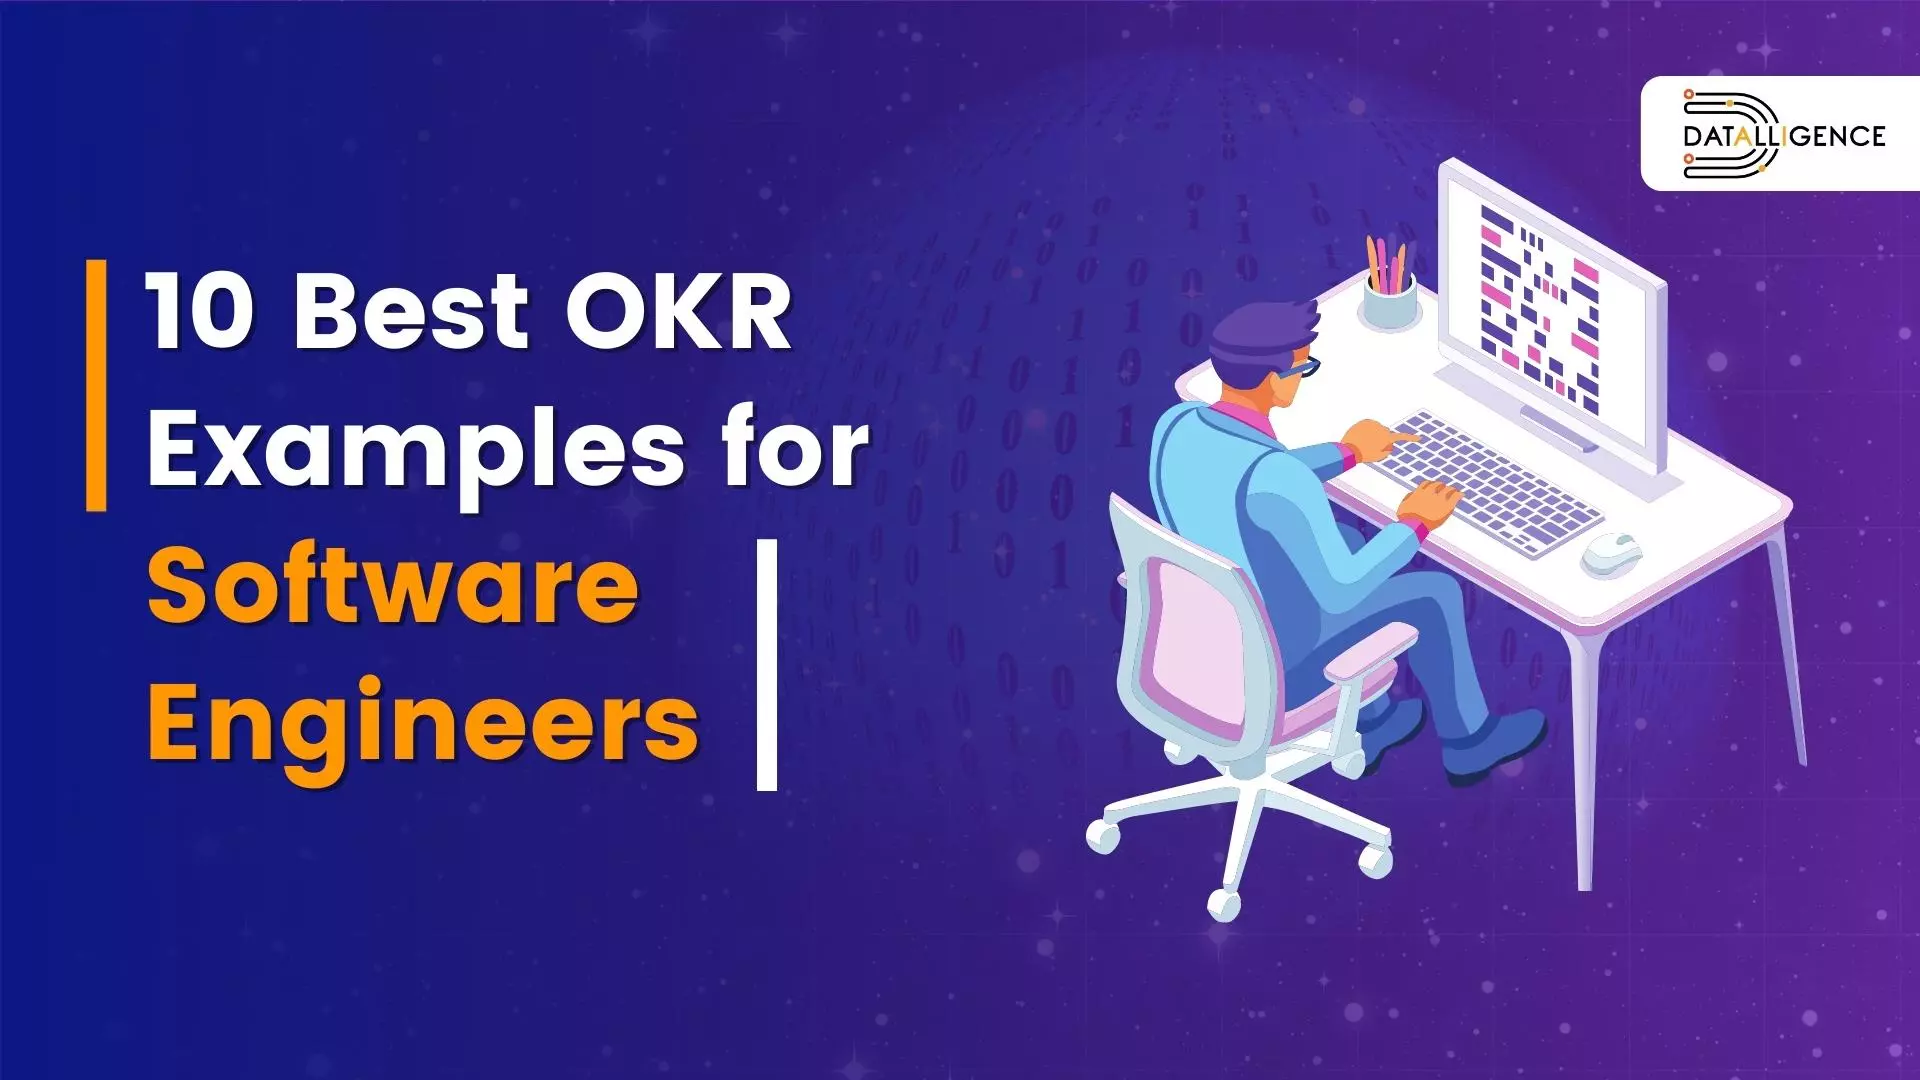 OKR Examples for Software engineers